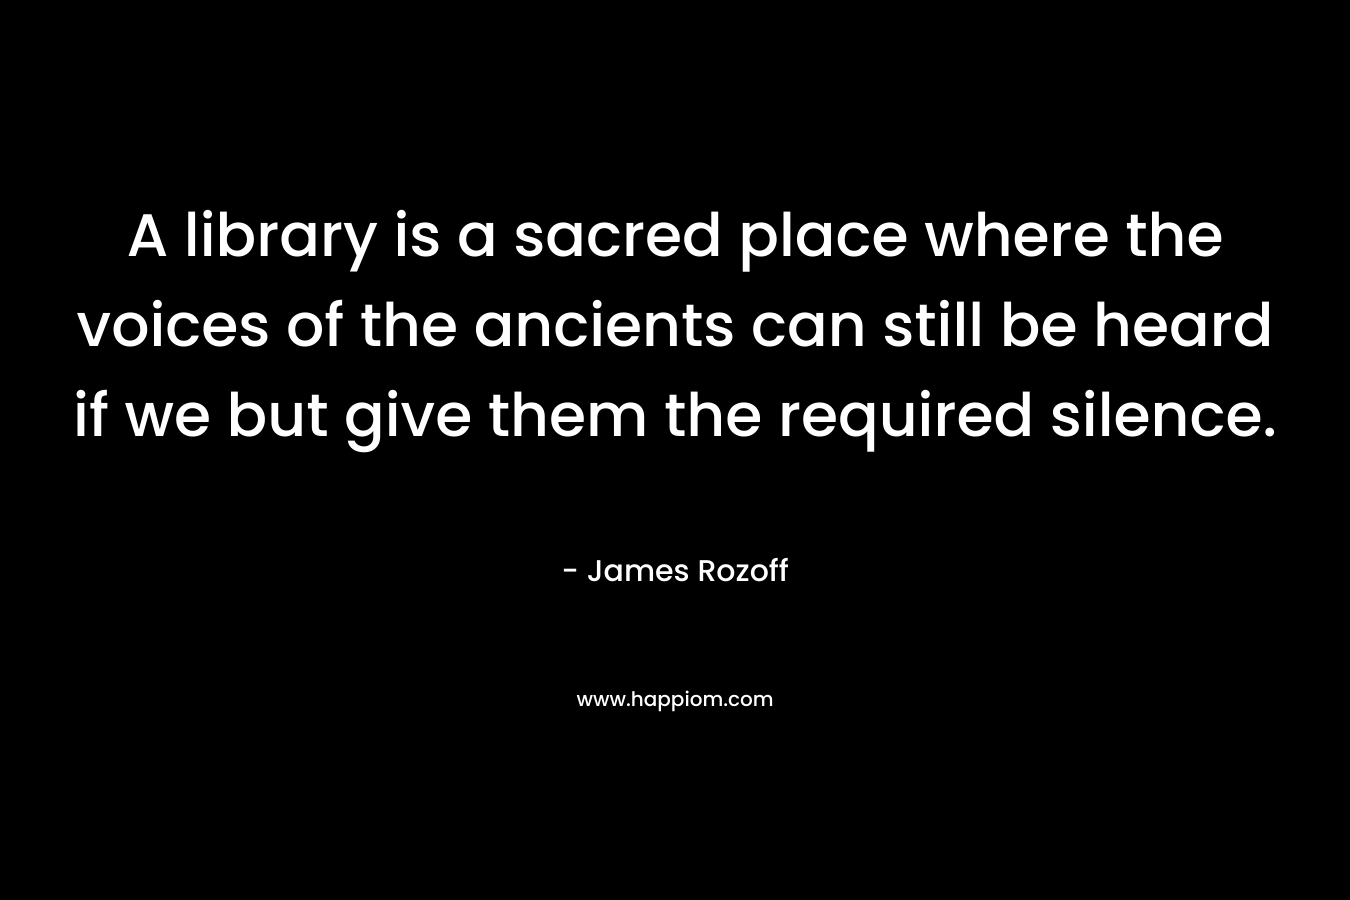 A library is a sacred place where the voices of the ancients can still be heard if we but give them the required silence.